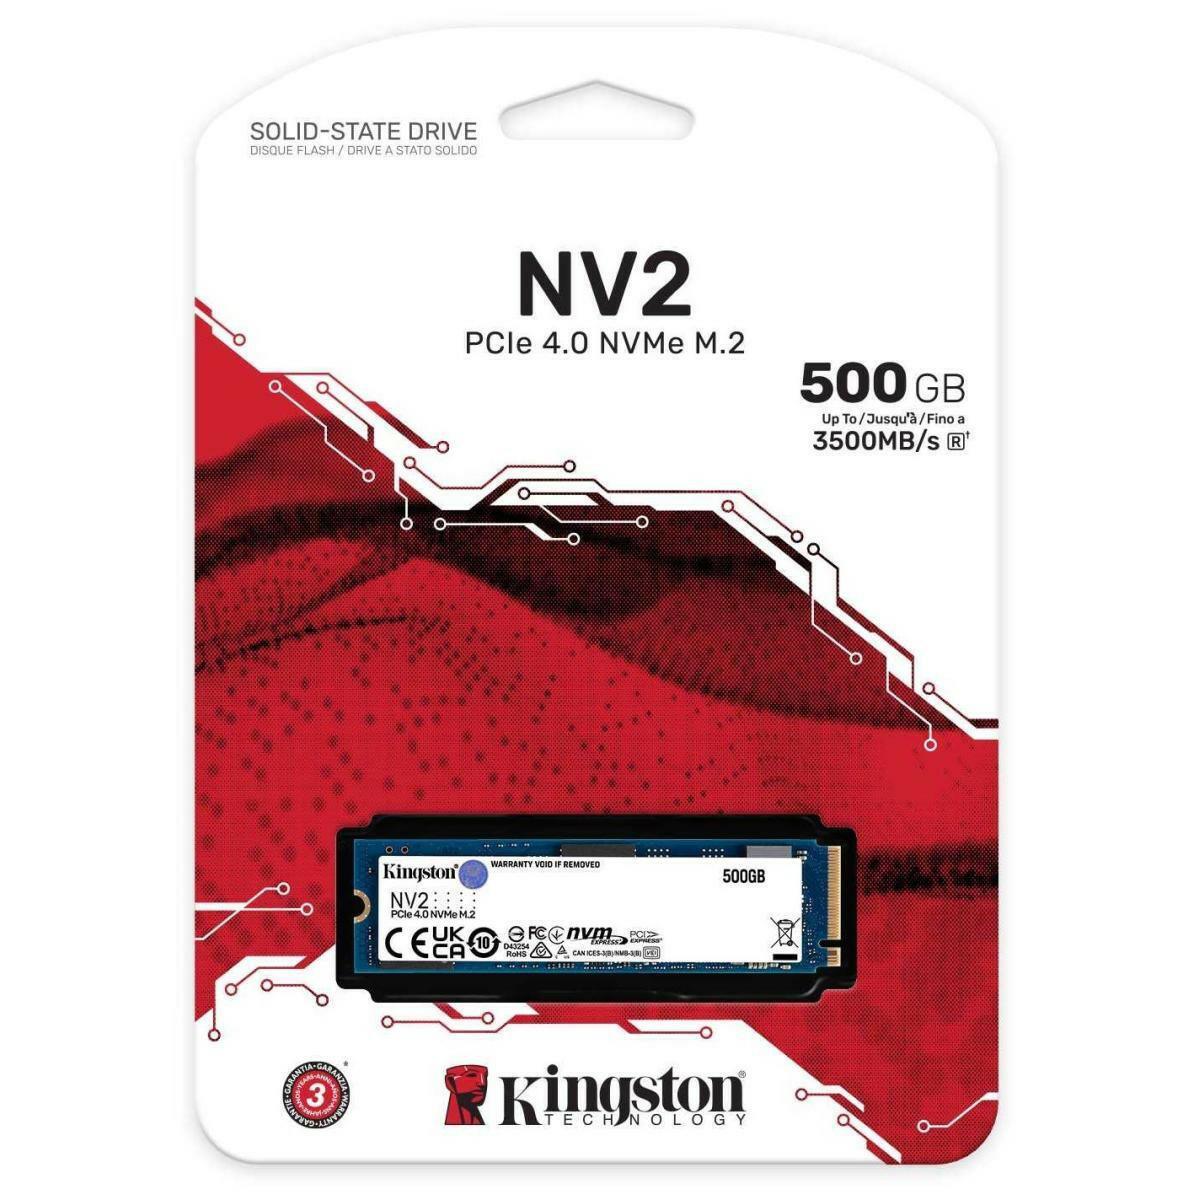 KINGSTON Solid State Drive Kingston NV2 500GB M.2 NVMe PCIe 4.0, GEN 4 SSD Up To 3500/2100 MB/s Read/Write